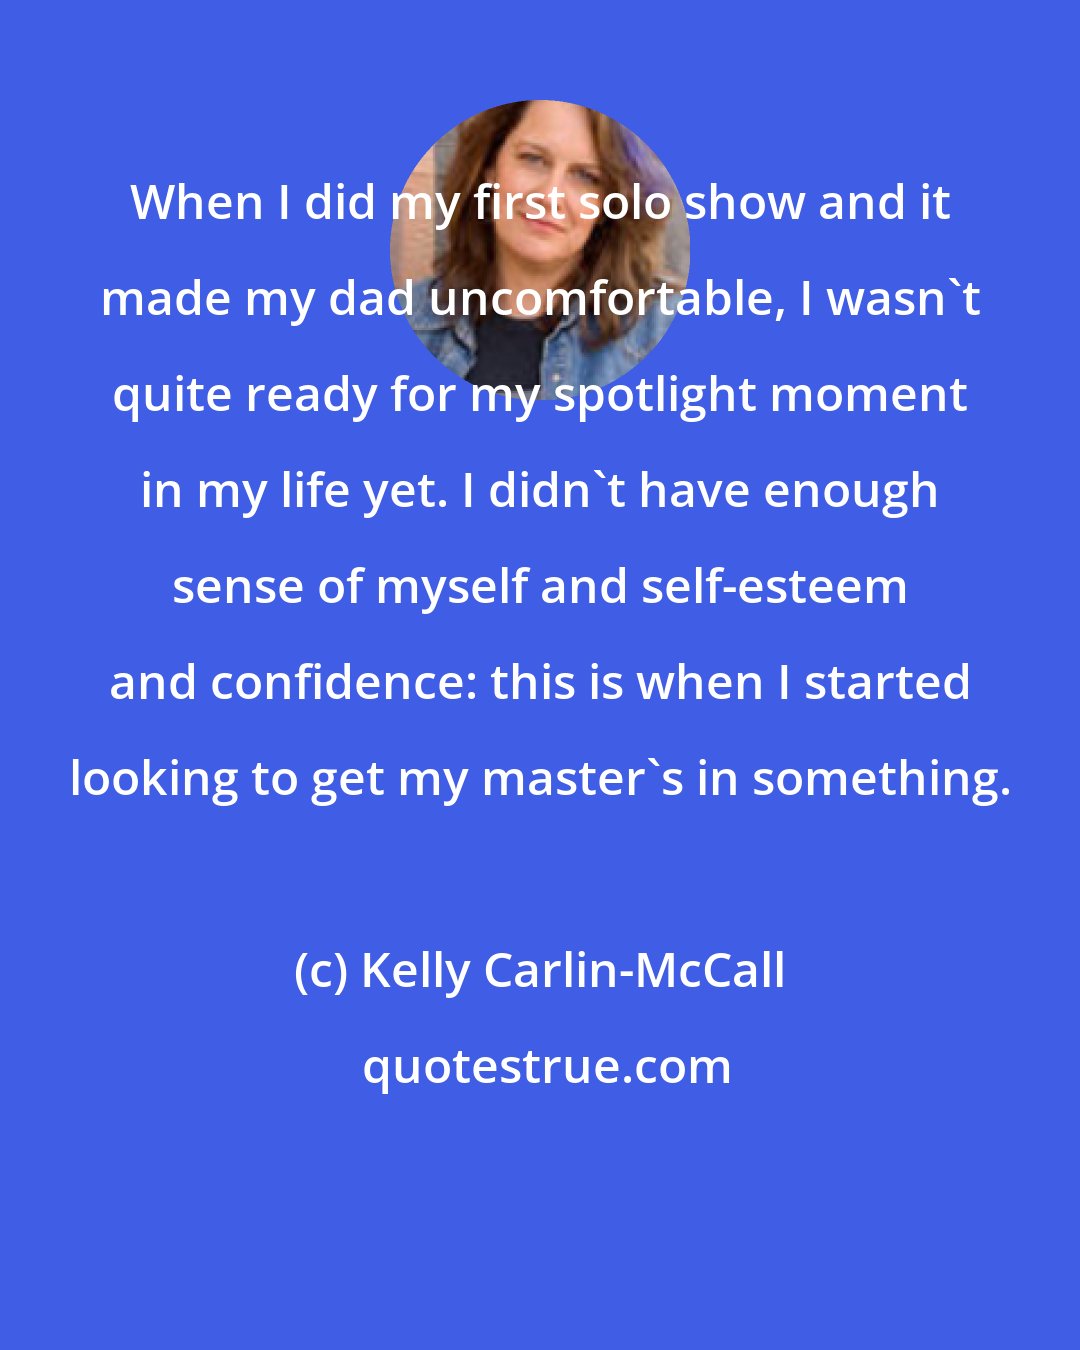 Kelly Carlin-McCall: When I did my first solo show and it made my dad uncomfortable, I wasn't quite ready for my spotlight moment in my life yet. I didn't have enough sense of myself and self-esteem and confidence: this is when I started looking to get my master's in something.